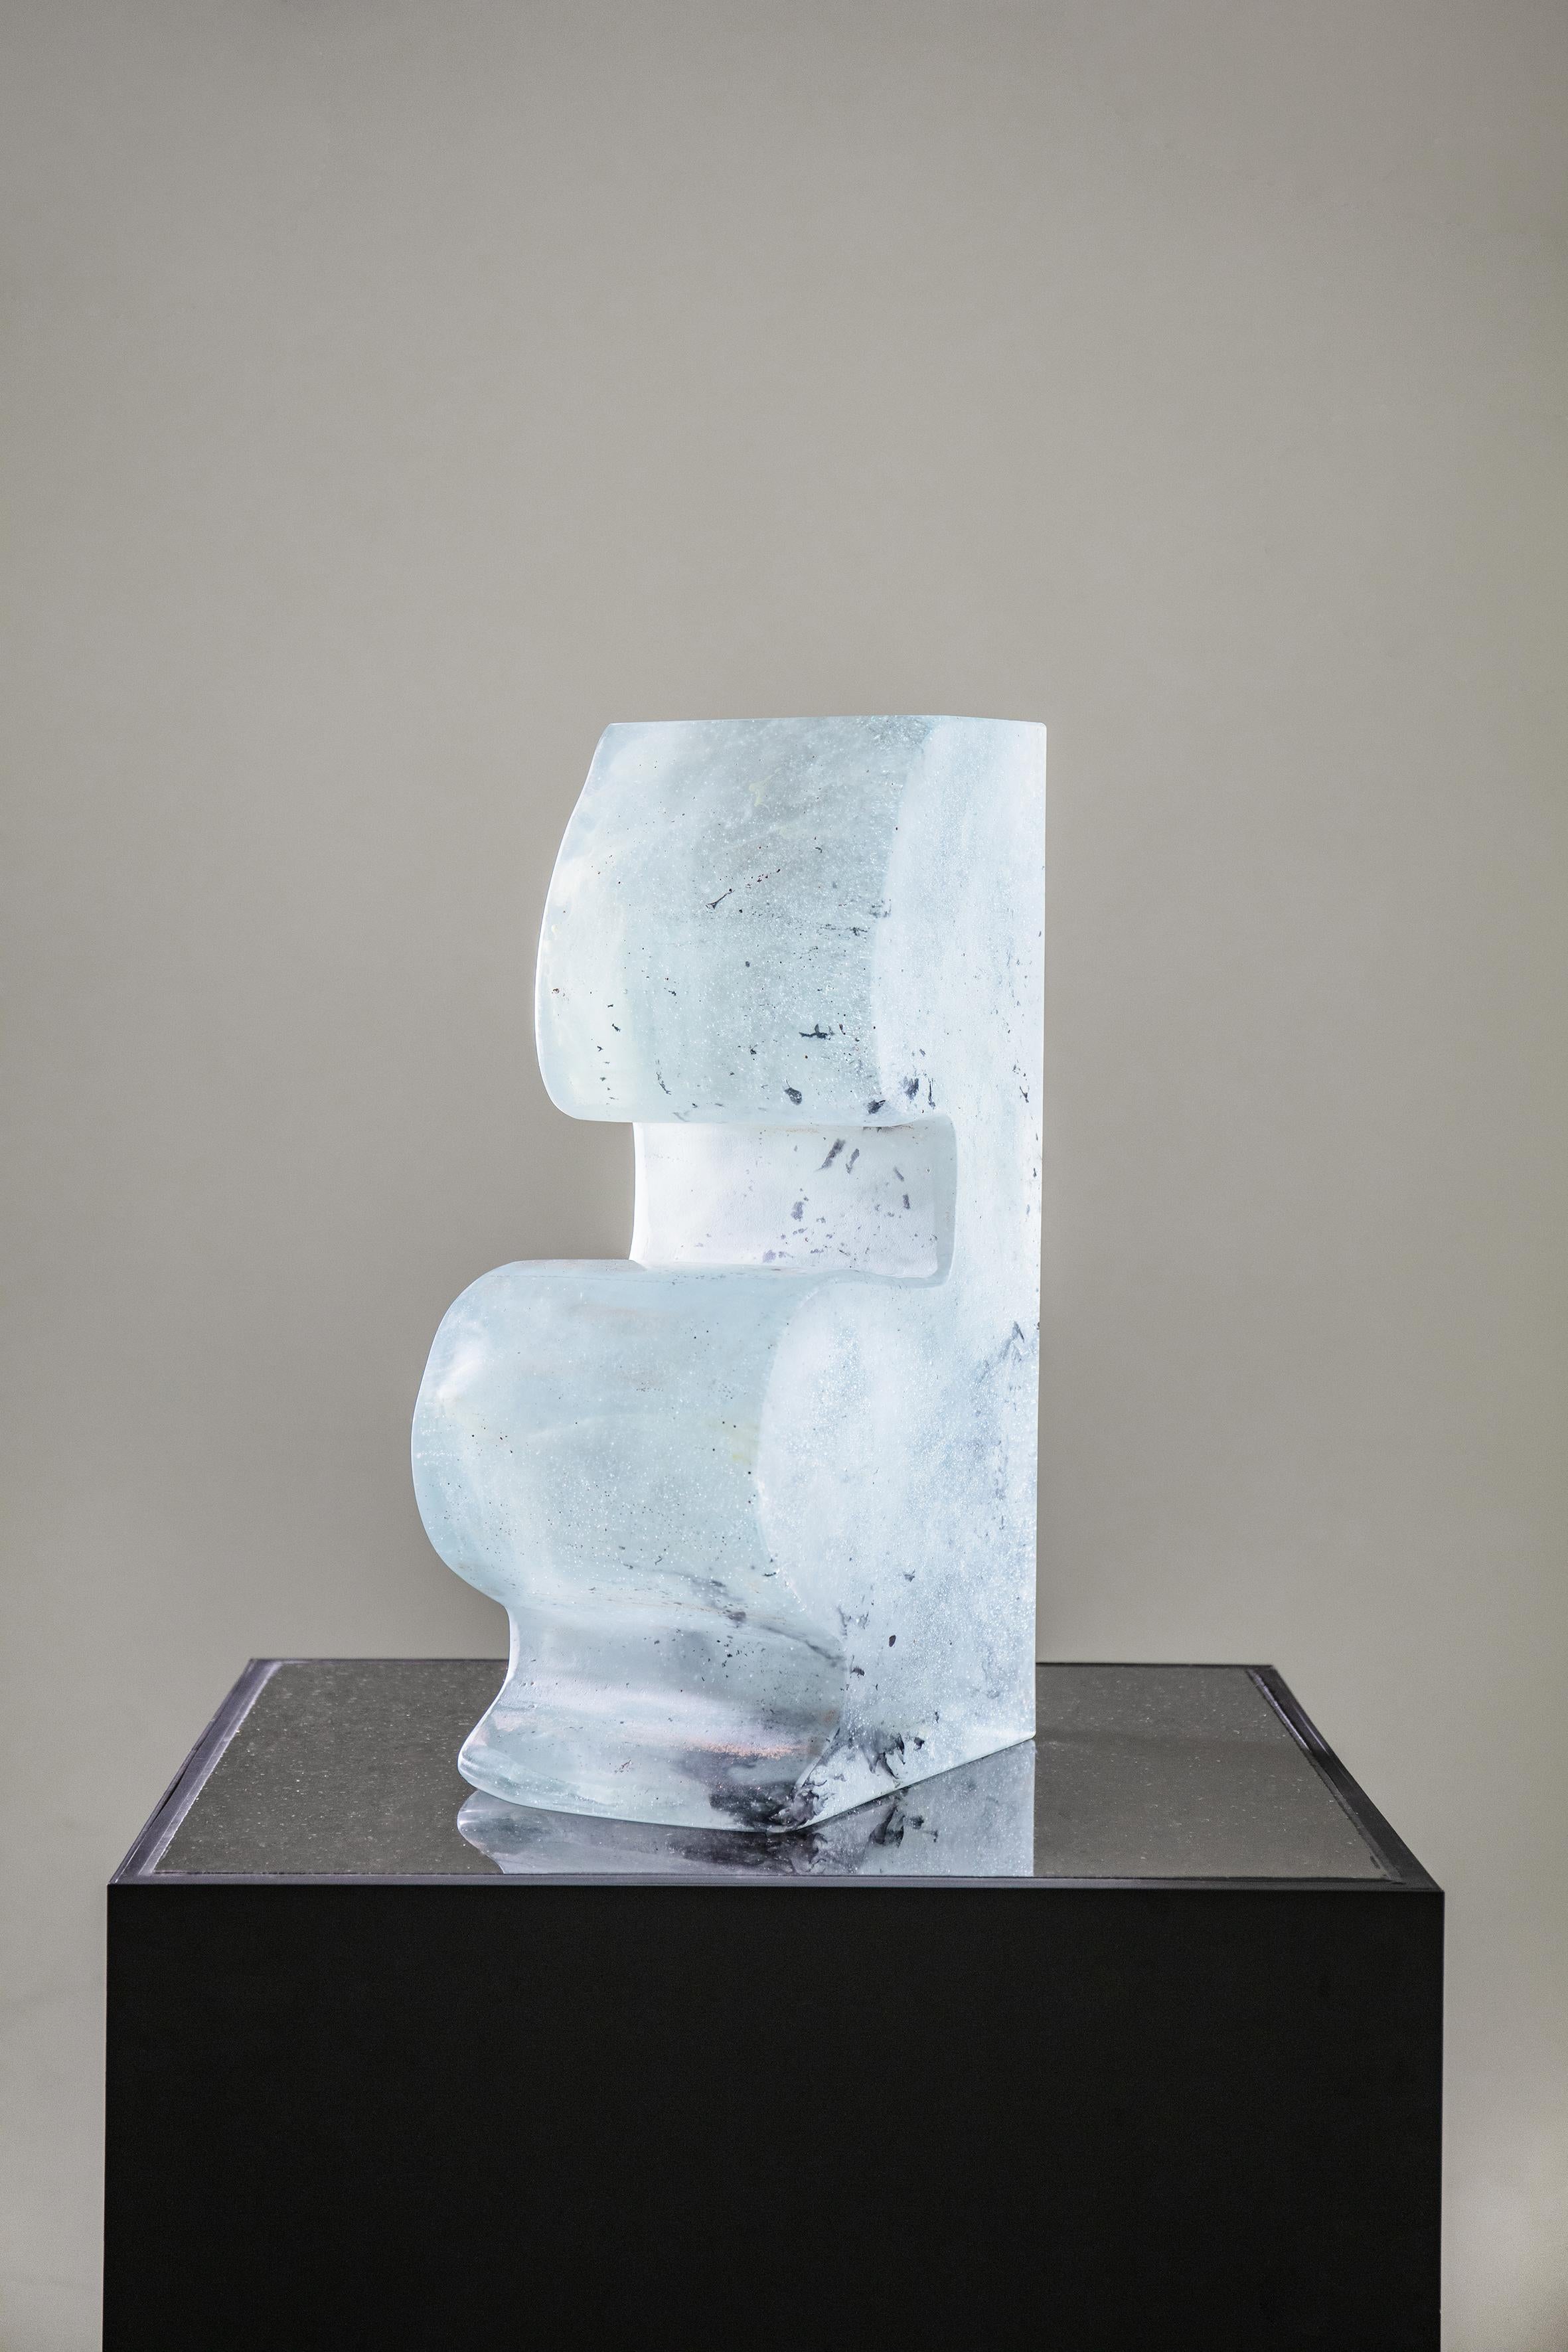 Coloured Glaze Sculpture-Series Four Seasons- Winter#1 - Gray Abstract Sculpture by He Wenjue